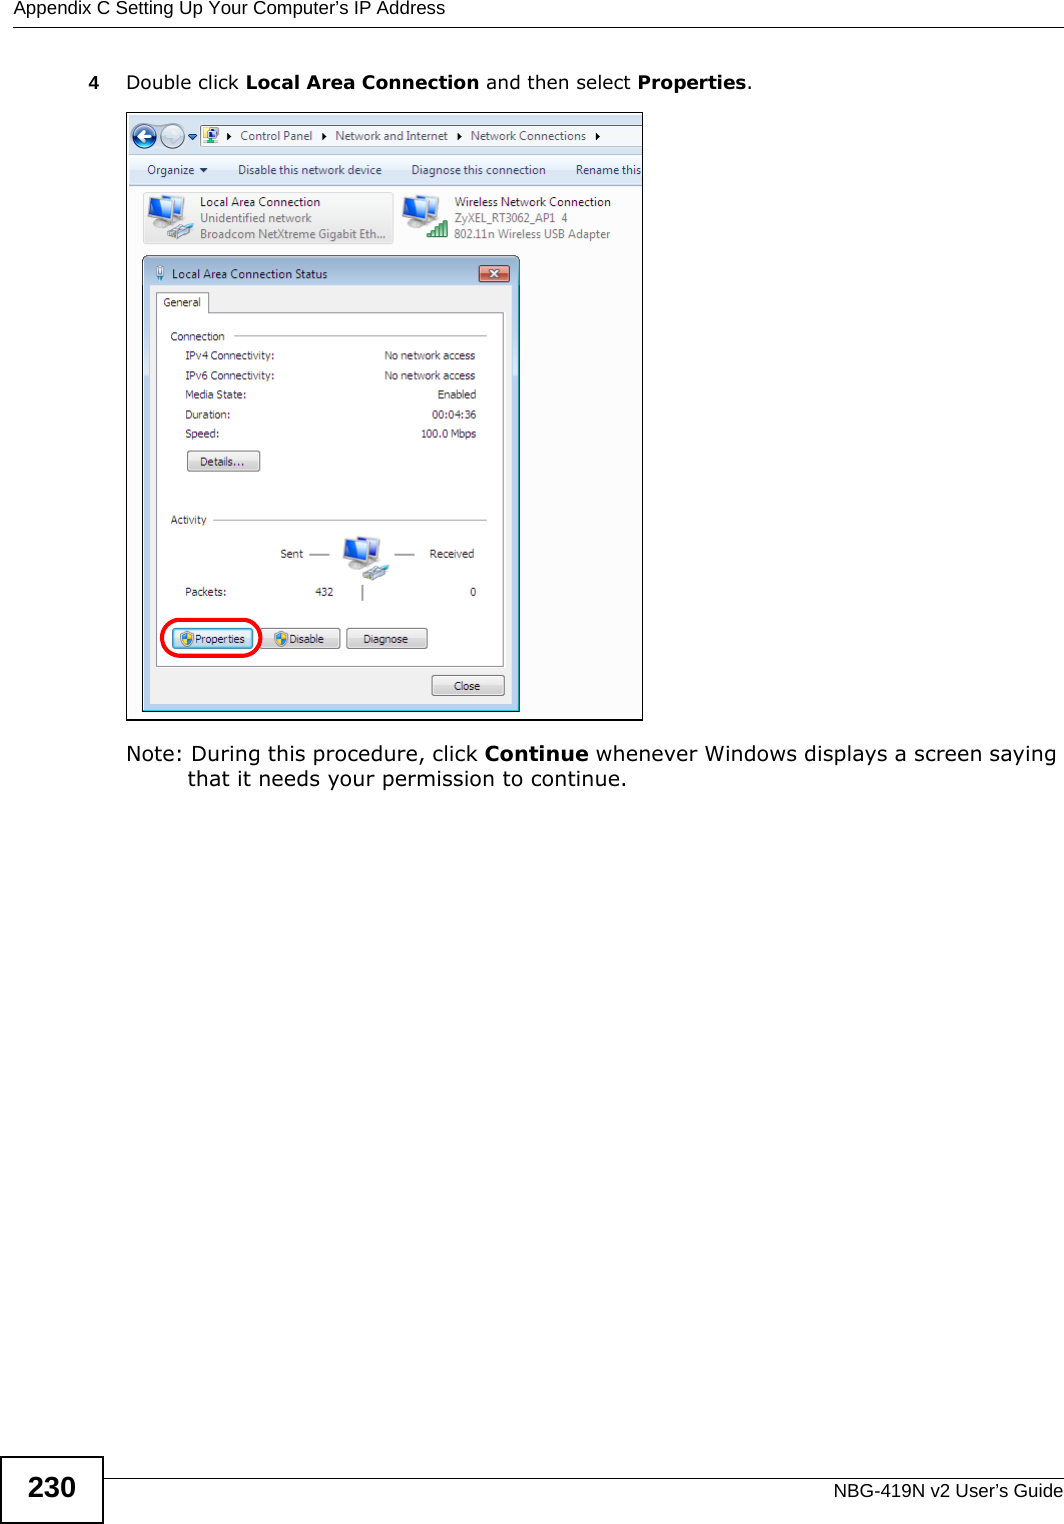 Appendix C Setting Up Your Computer’s IP AddressNBG-419N v2 User’s Guide2304Double click Local Area Connection and then select Properties.Note: During this procedure, click Continue whenever Windows displays a screen saying that it needs your permission to continue.